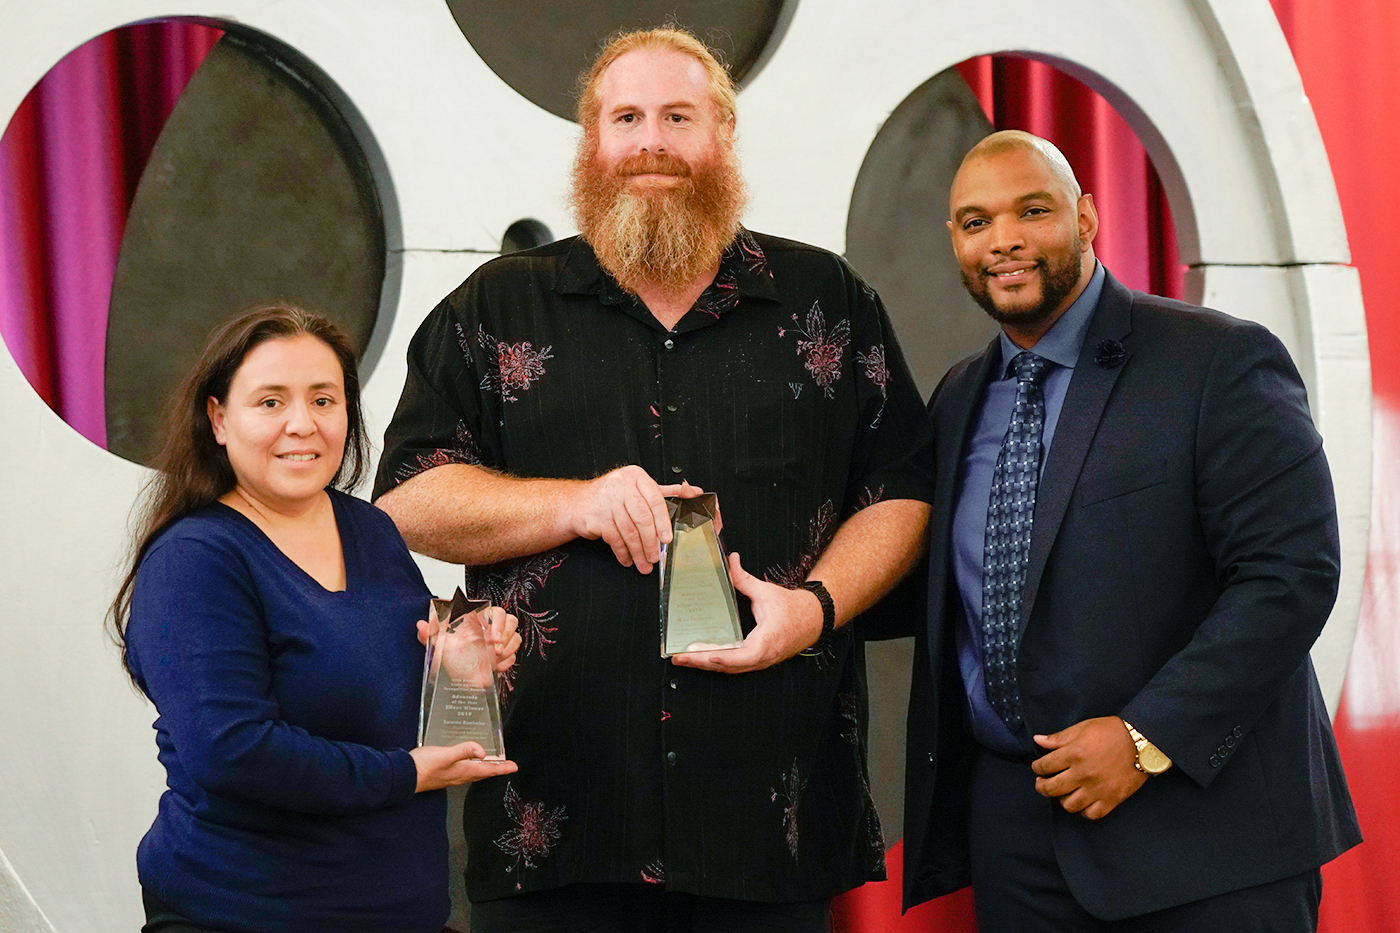 Jermaine Carter-Gibson, Department of General Services, presents Lauren Boehnke and Mike Fairbanks, Department of Corrections and Rehabilitation - California Institution for Men, with the Silver Advocate of the Year Award.